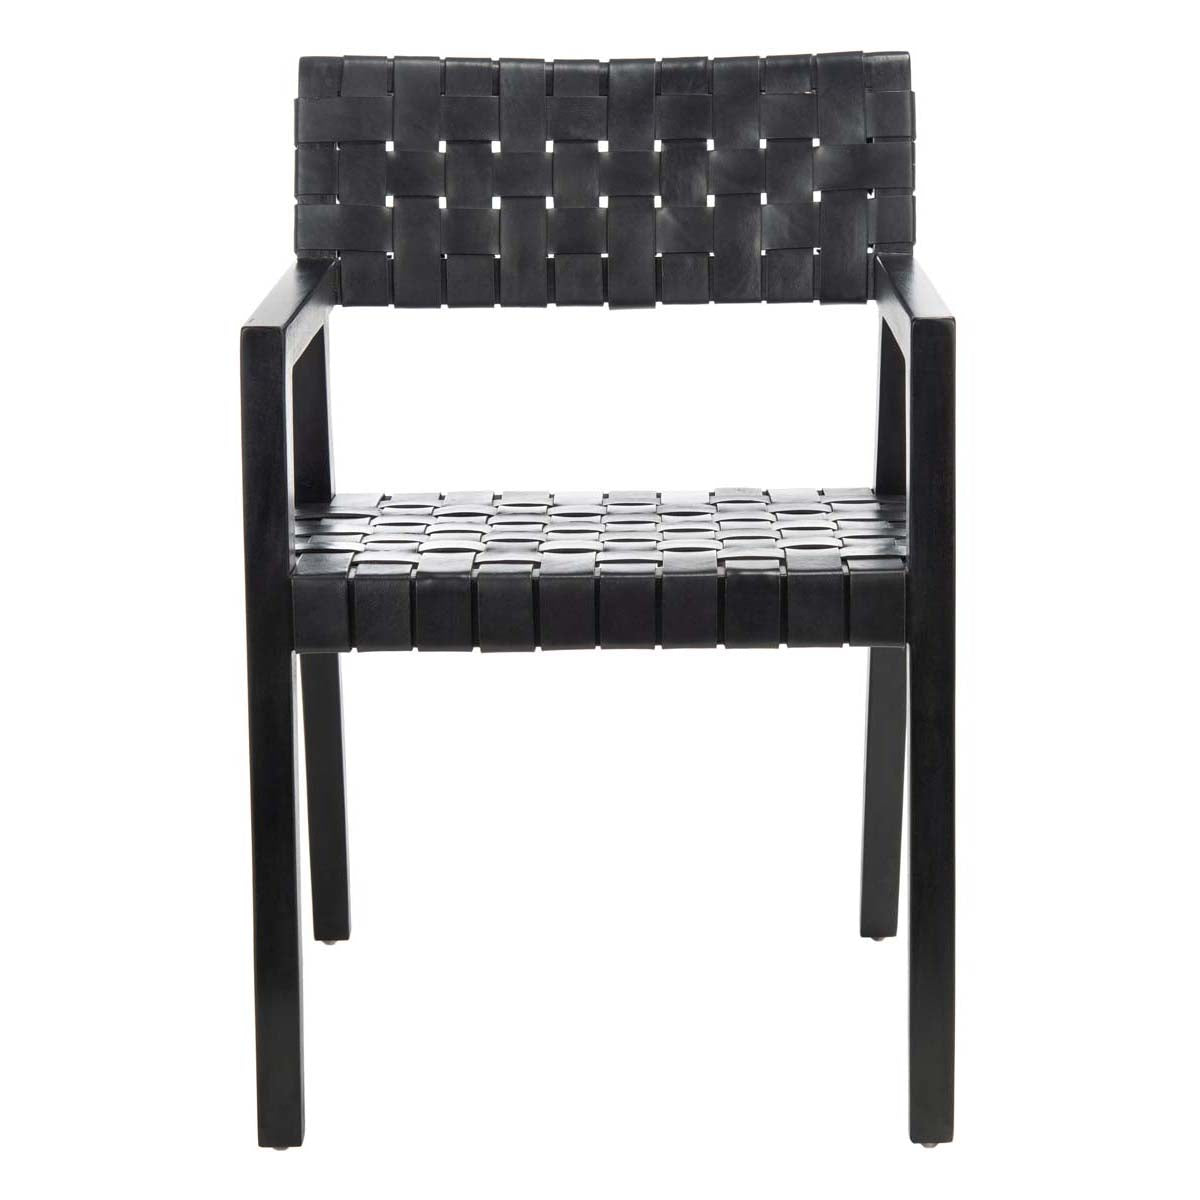 Safavieh Cire Leather Dining Chair , DCH4004 - Black